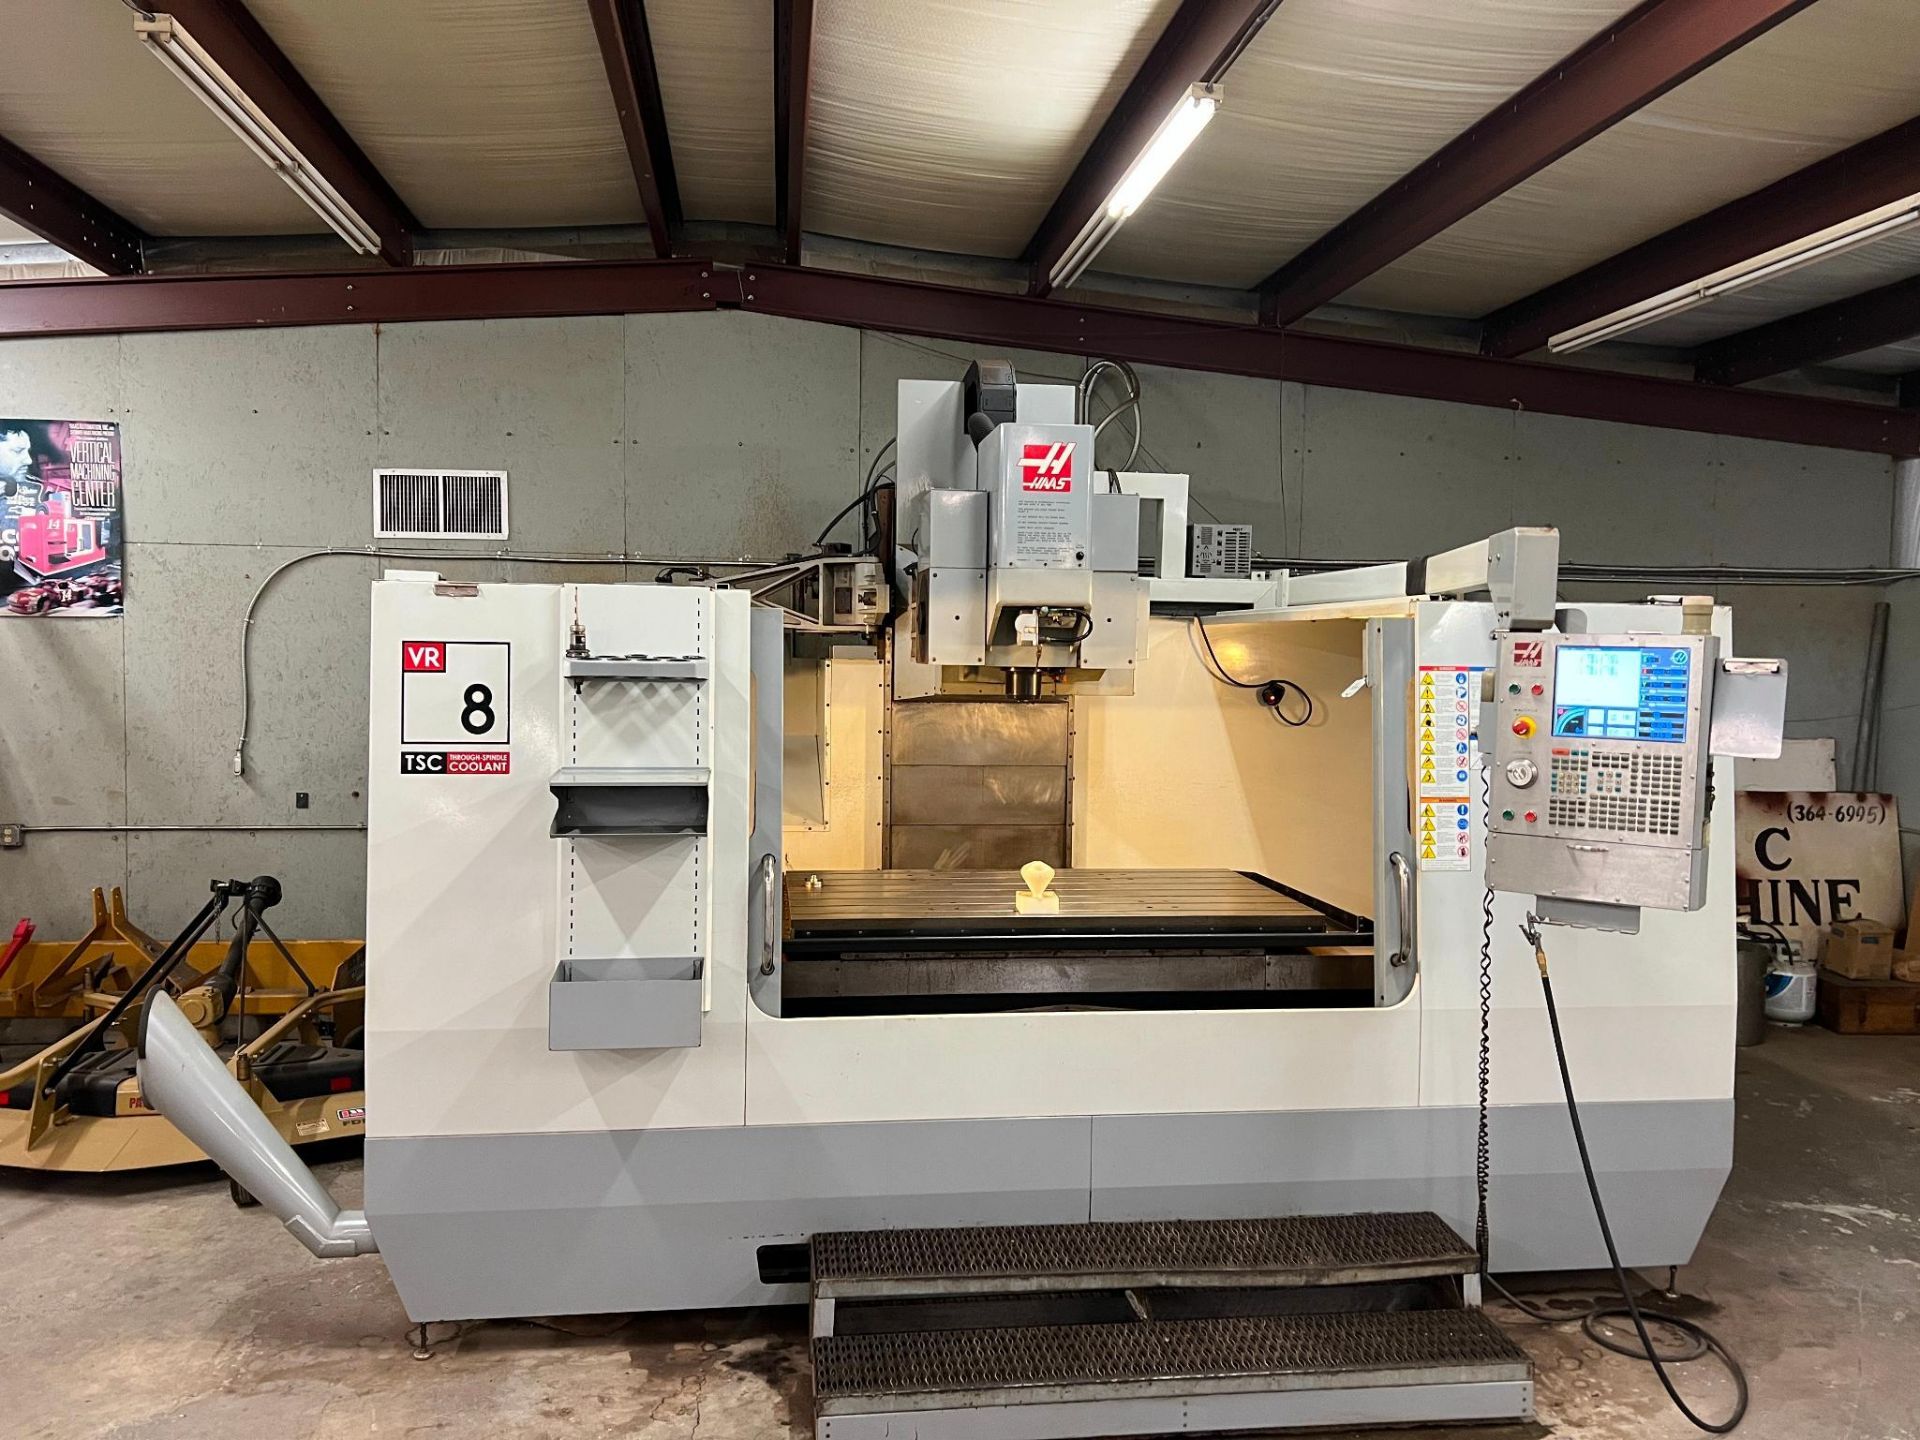 2007 Haas VR-8 5-Axis CNC Vertical Machining Center Serial Number: 1057089 X-Axis Travel: 64" Y-Axis - Image 3 of 37